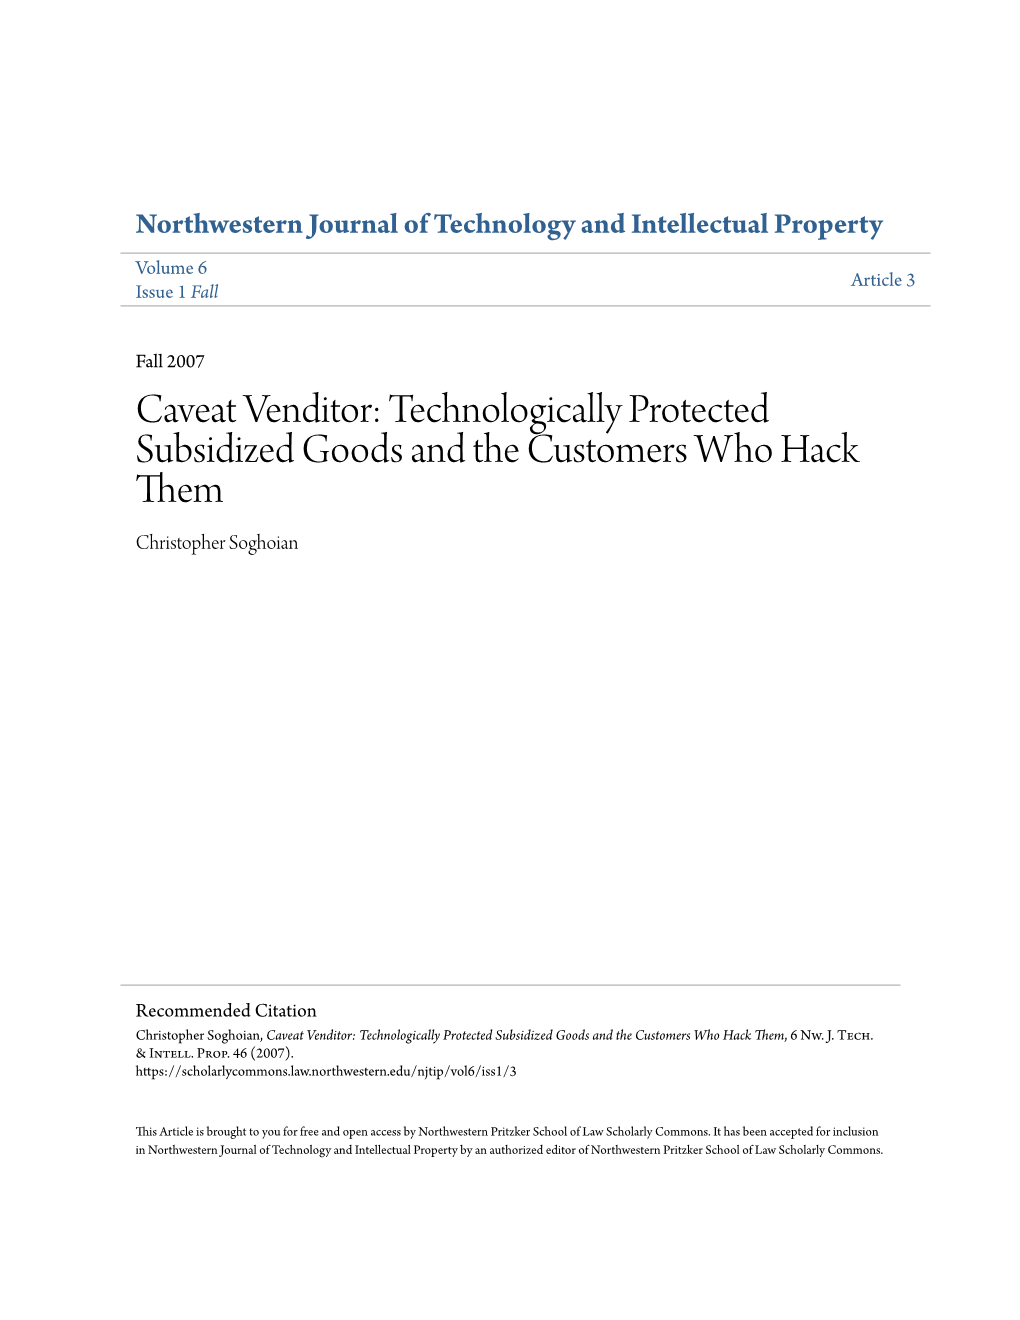 Caveat Venditor: Technologically Protected Subsidized Goods and the Customers Who Hack Them Christopher Soghoian